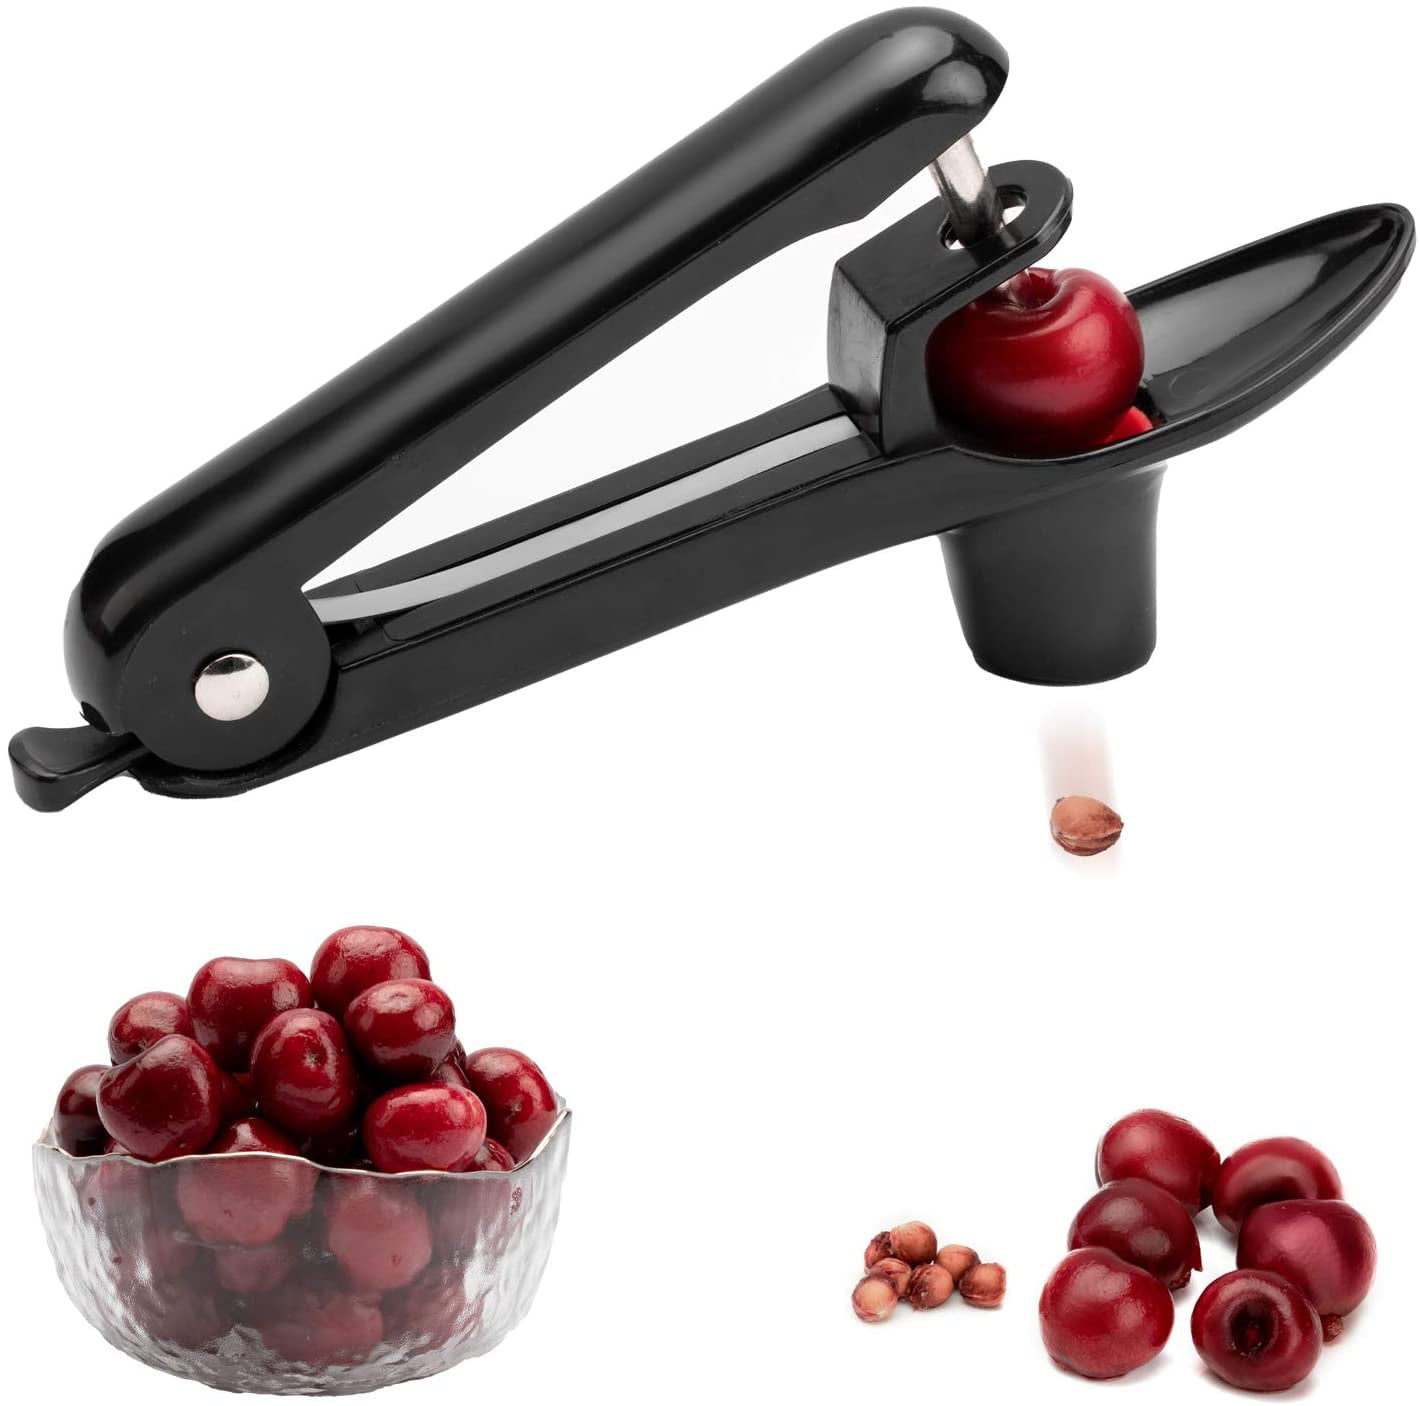 Black Olive Corer with lock for Home Kitchen Olive,Jujube and Red Date Portable Olive and Cherry Pitter Cherry Stoner Seed and Olive Tool Remover Cherry Cherry Pitter Tool 